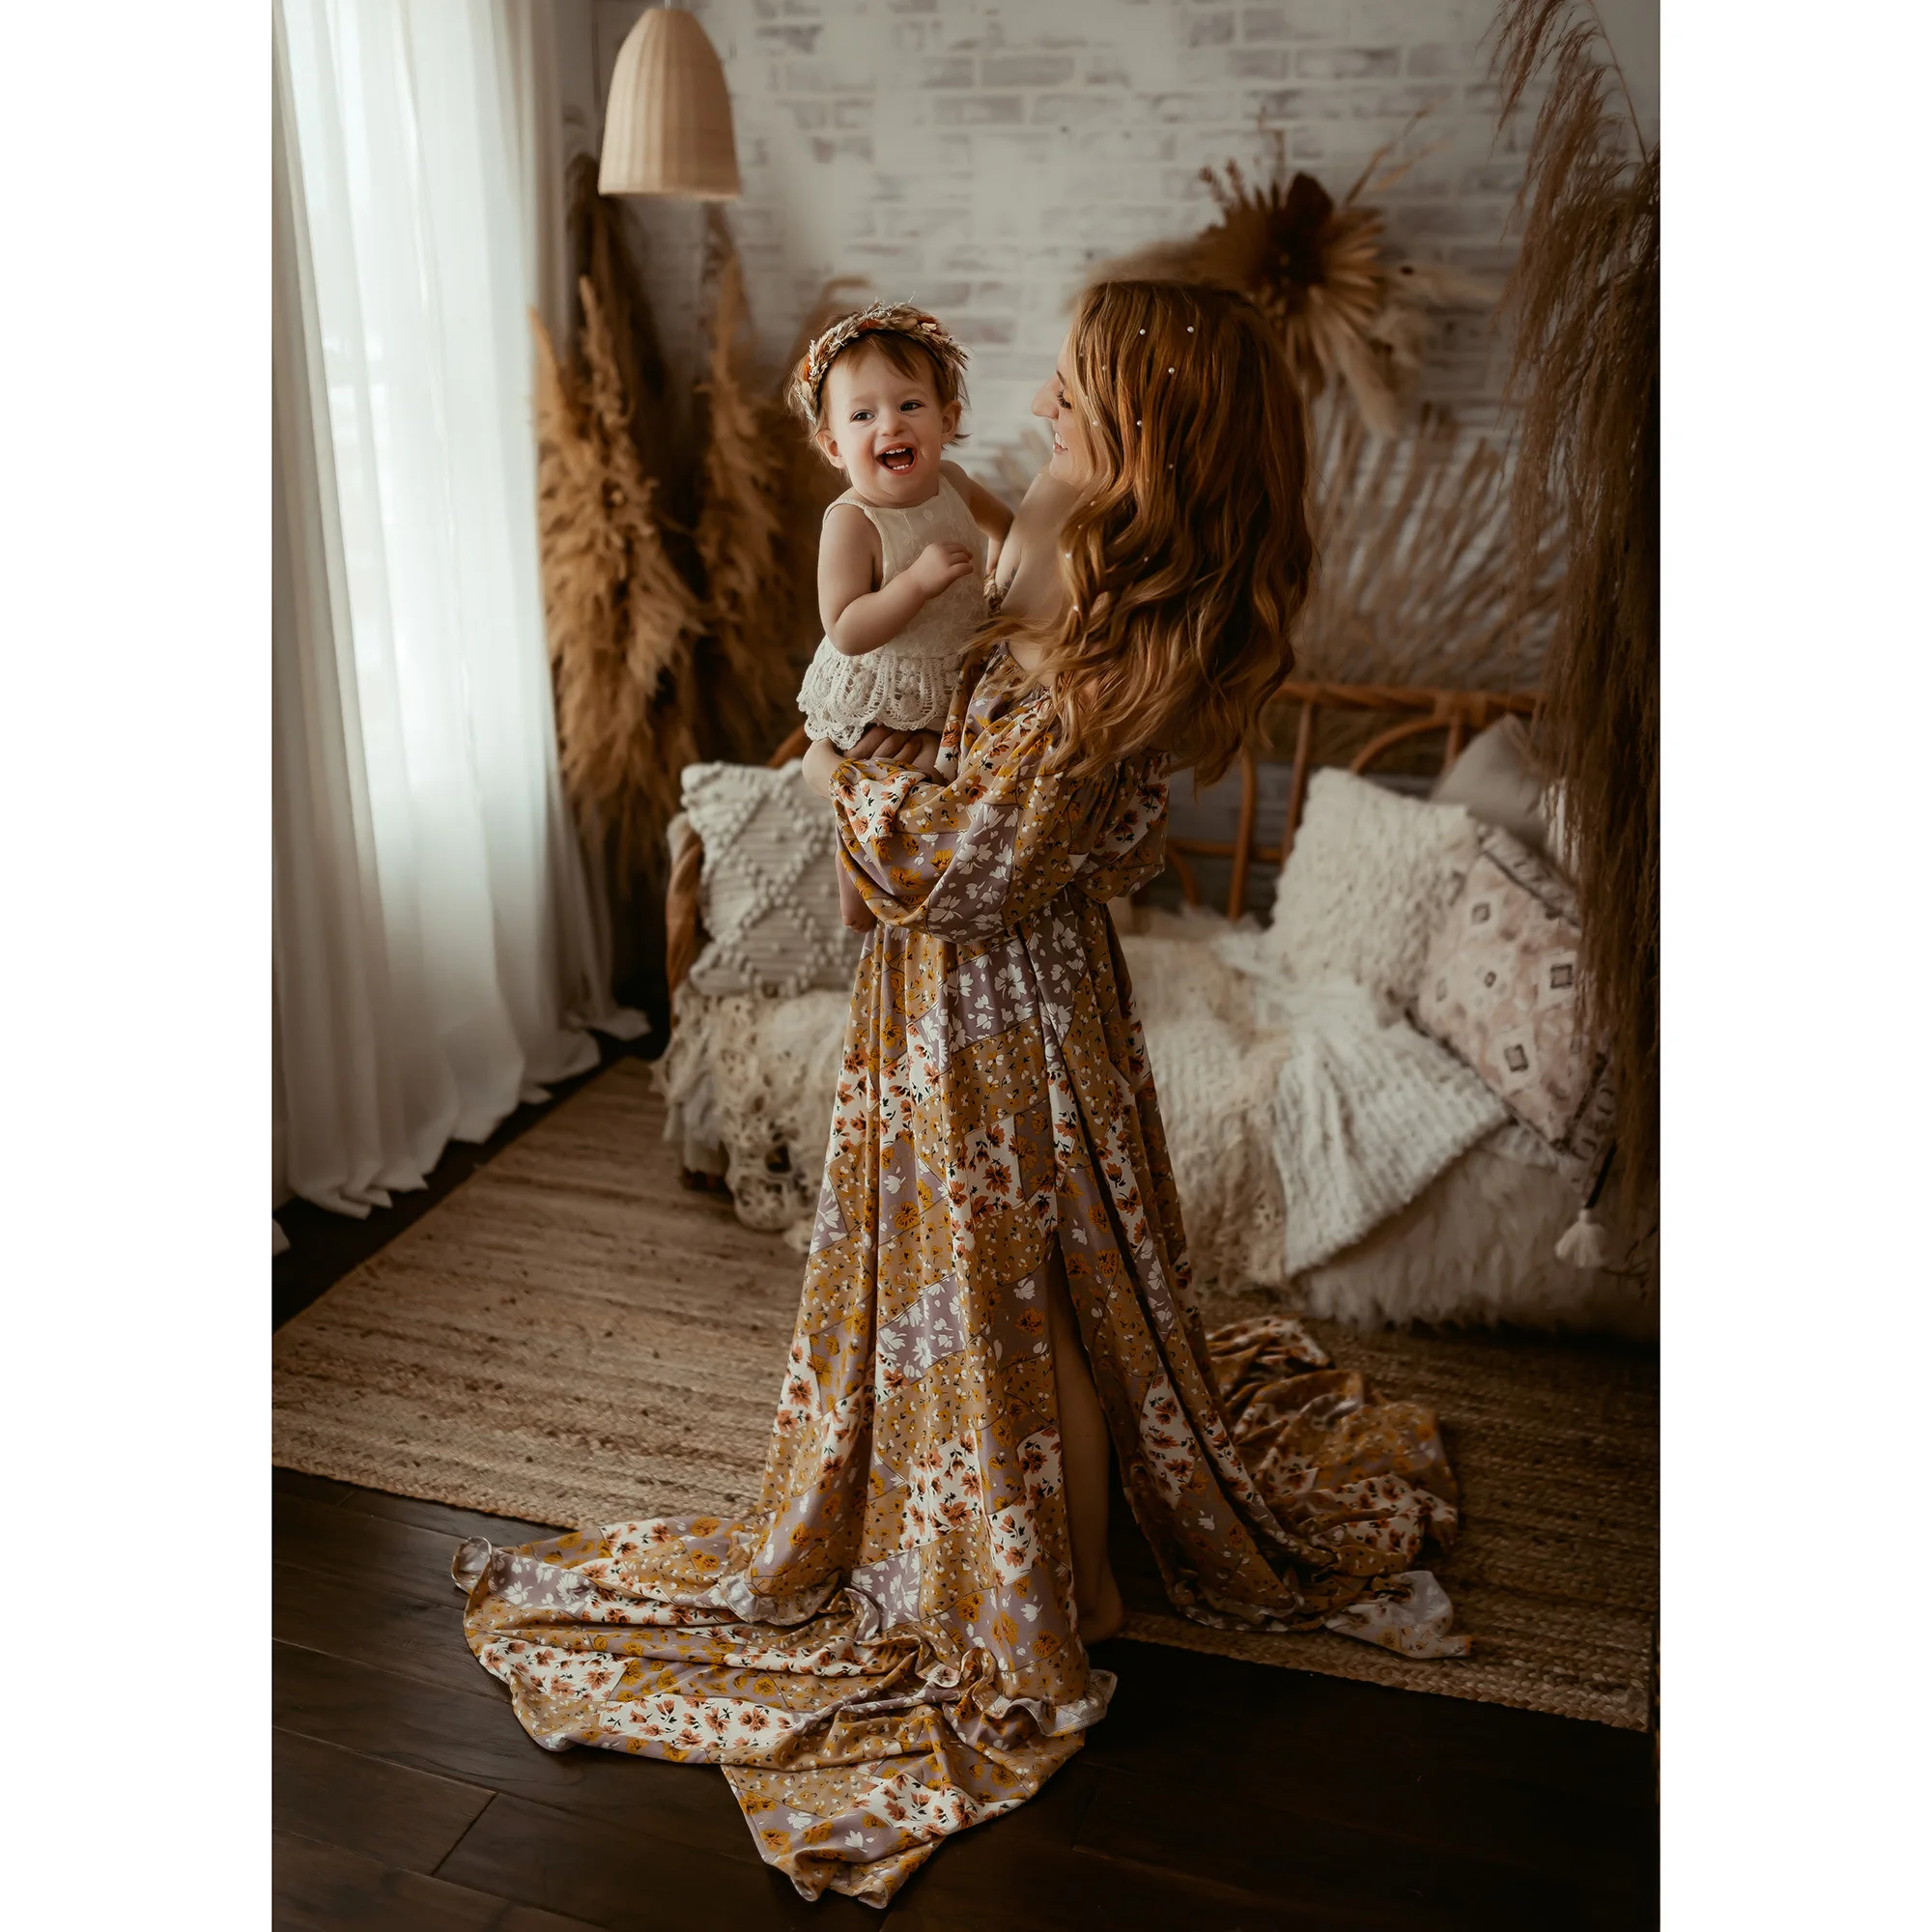 A Suite Costume Photo Maternity Puff Long Dress Sleeves Pregnant Chiffon Floral Gown Maxi Robe for Woman Photography Accessories enlarge